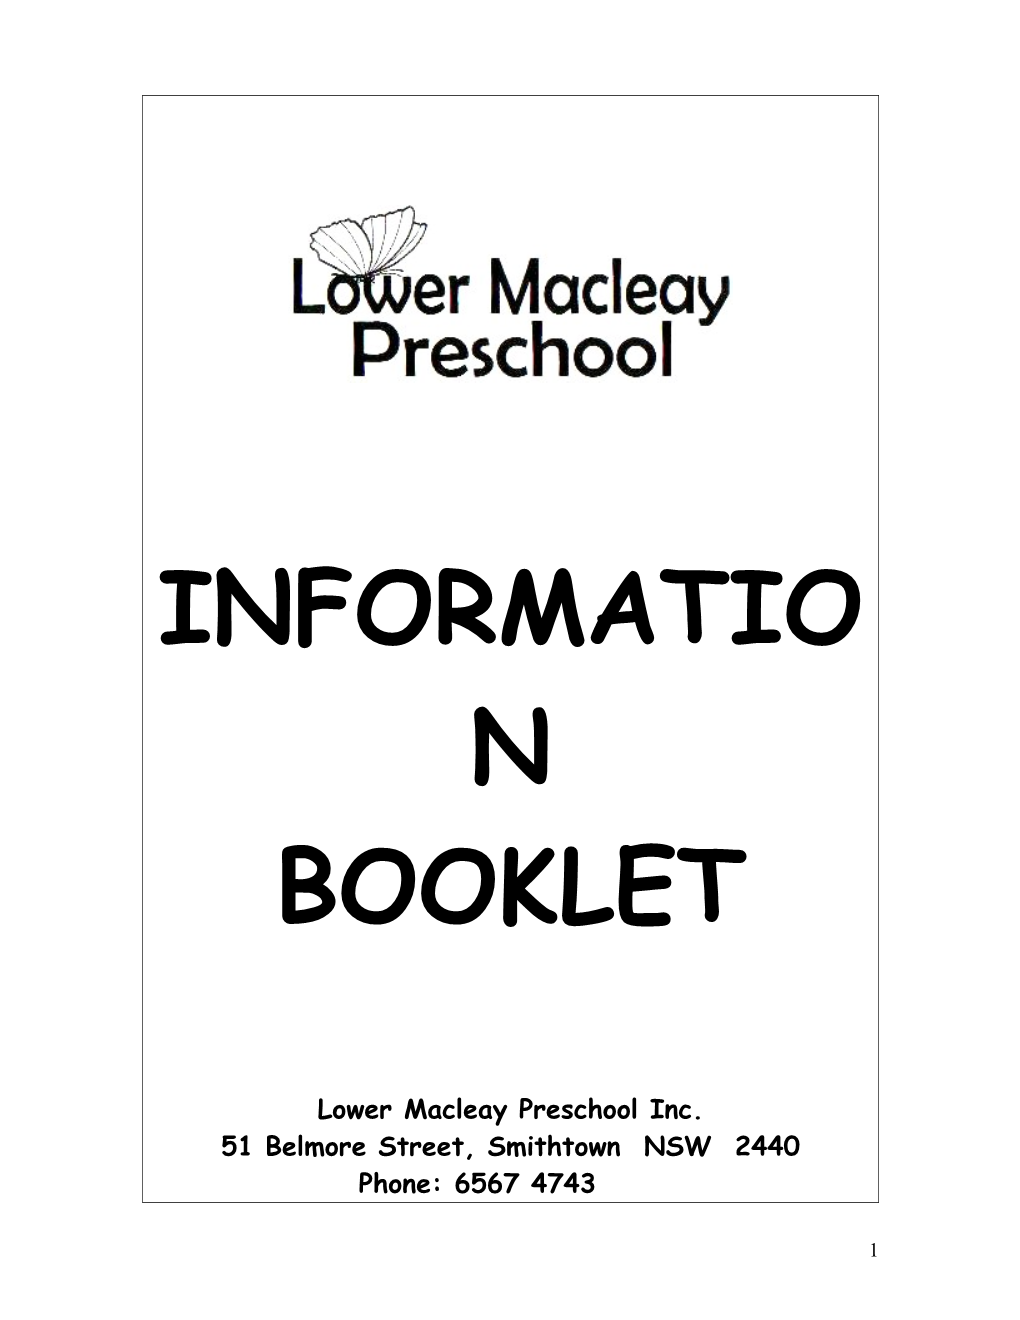 Welcome to the Lower Macleay Pre-School